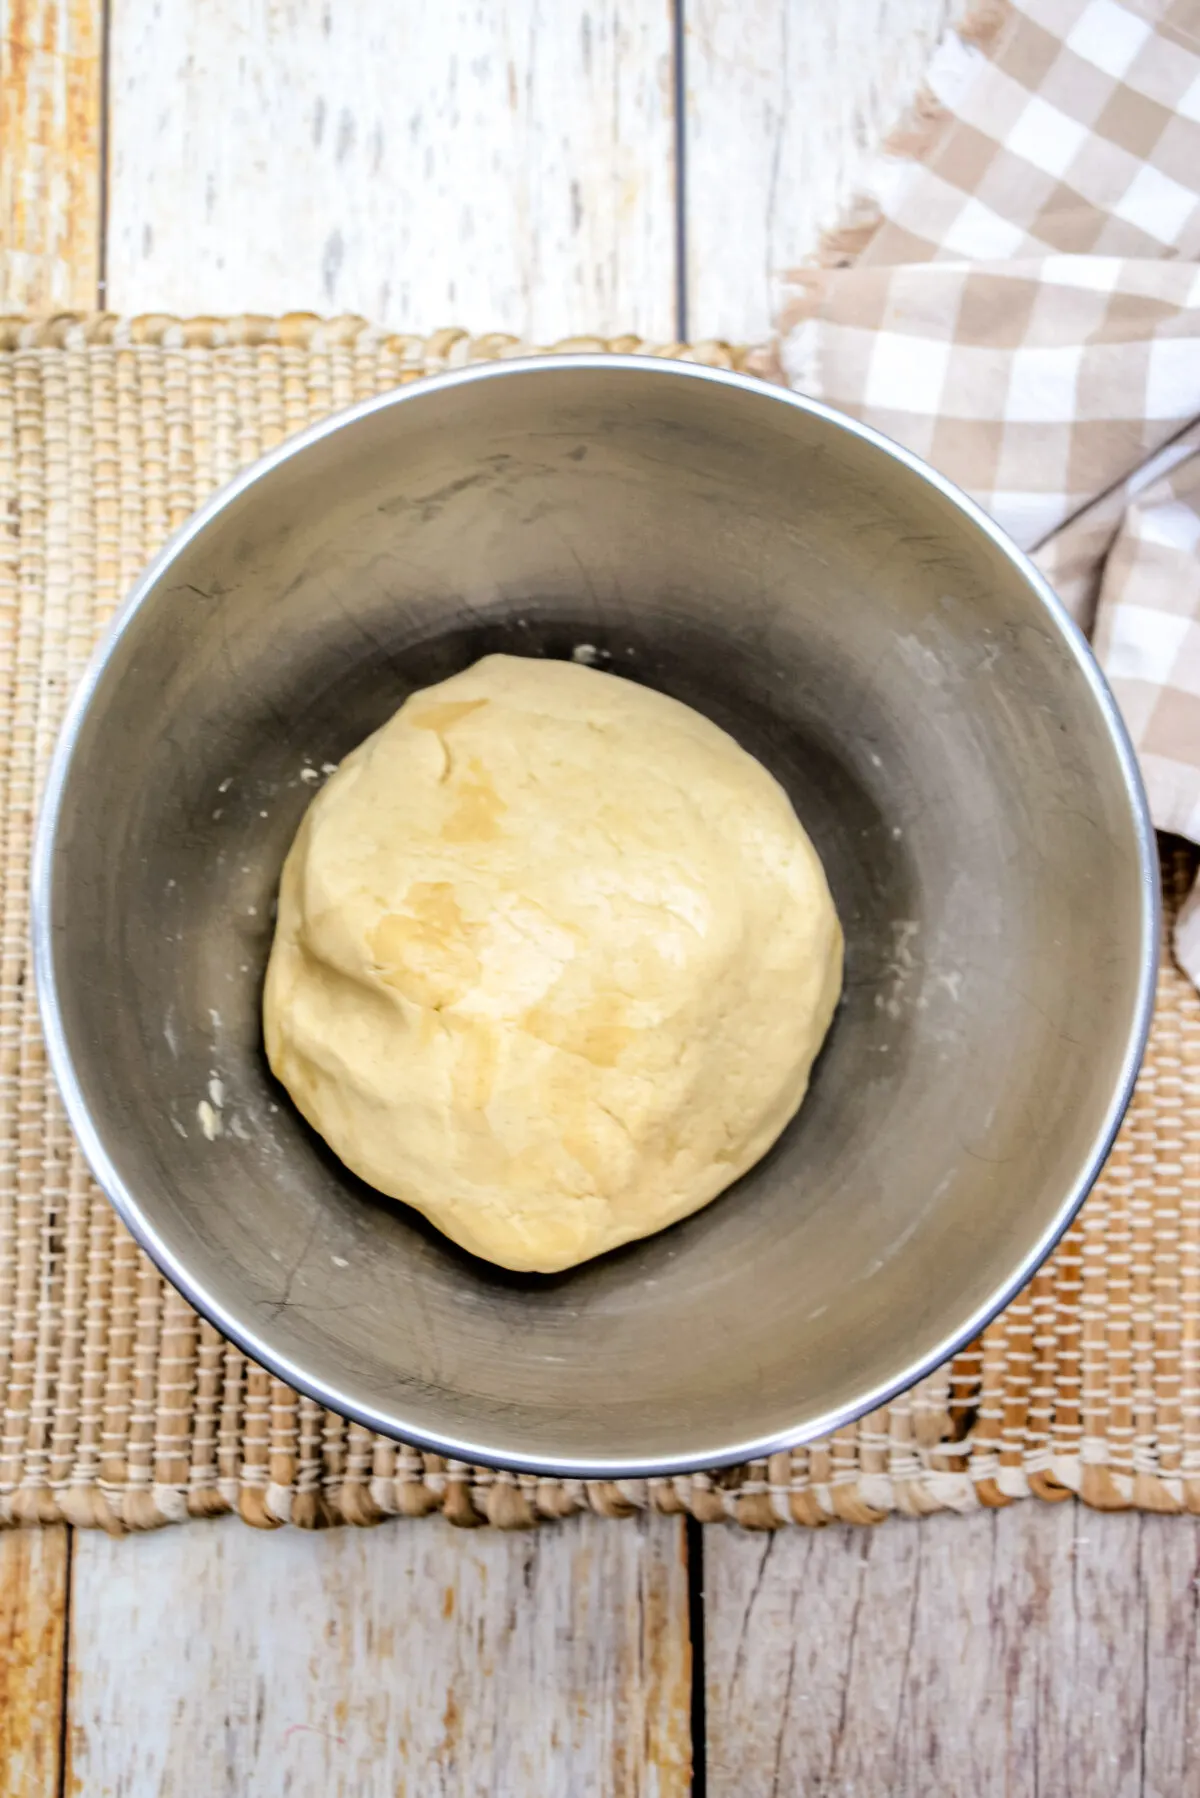 Dough formed in a large mixing bowl.